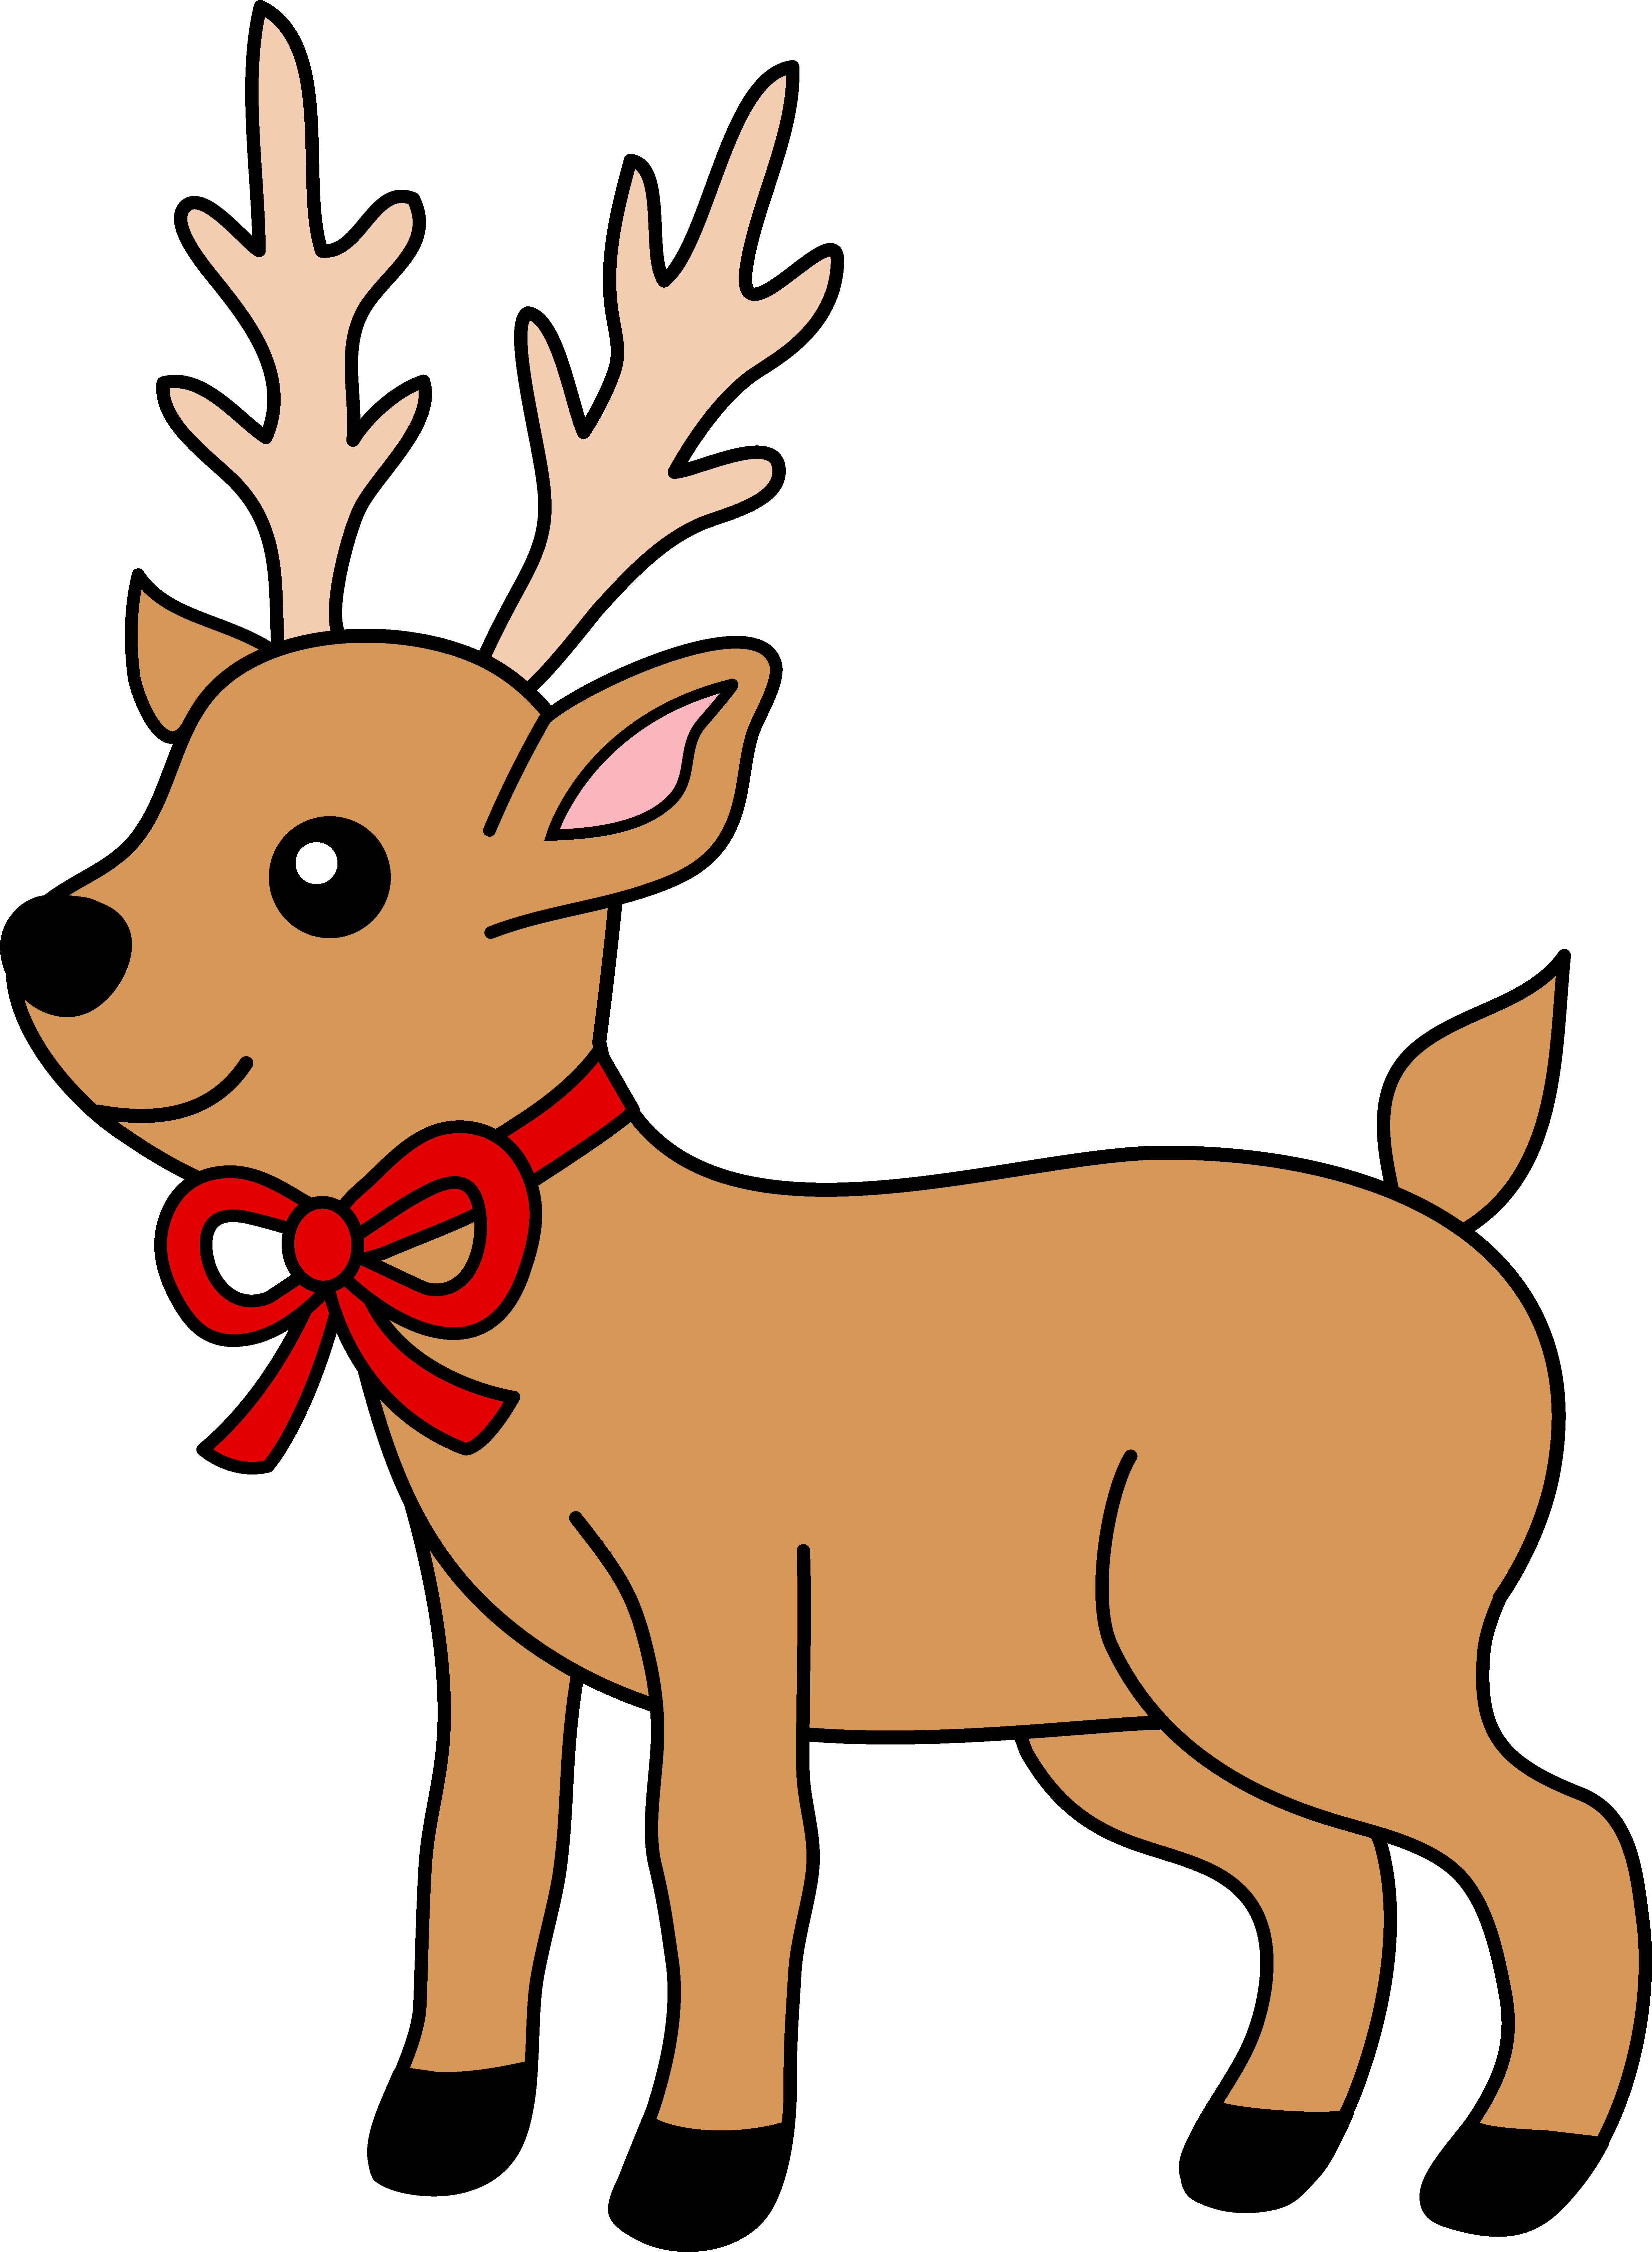 Free Christmas Reindeer Images, Download Free Christmas Reindeer Images png  images, Free ClipArts on Clipart Library